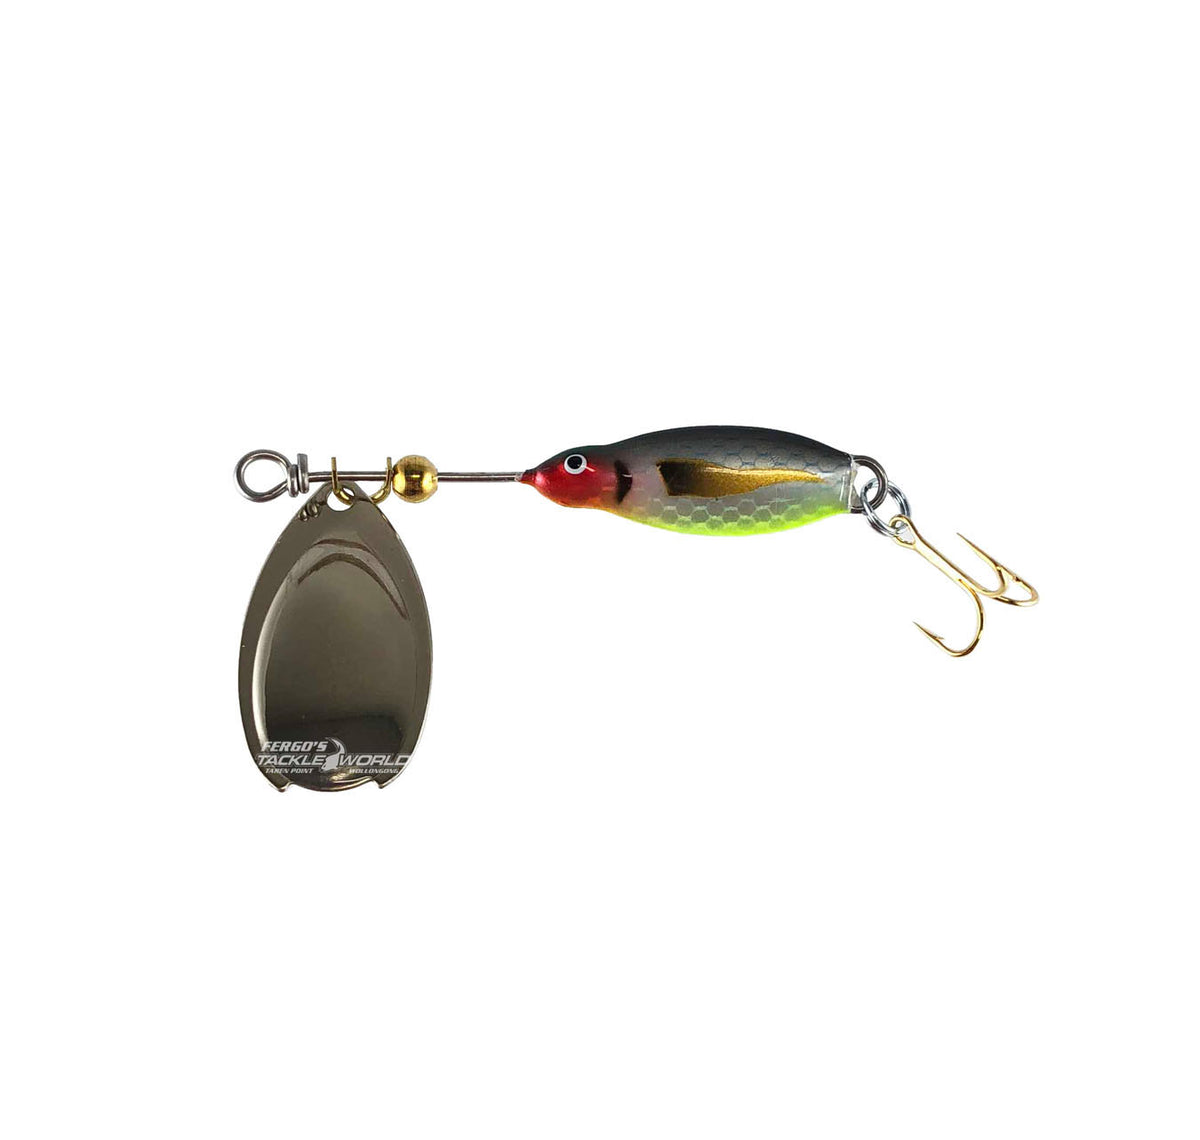 Nils Master Lotto Spinner 6g Lures